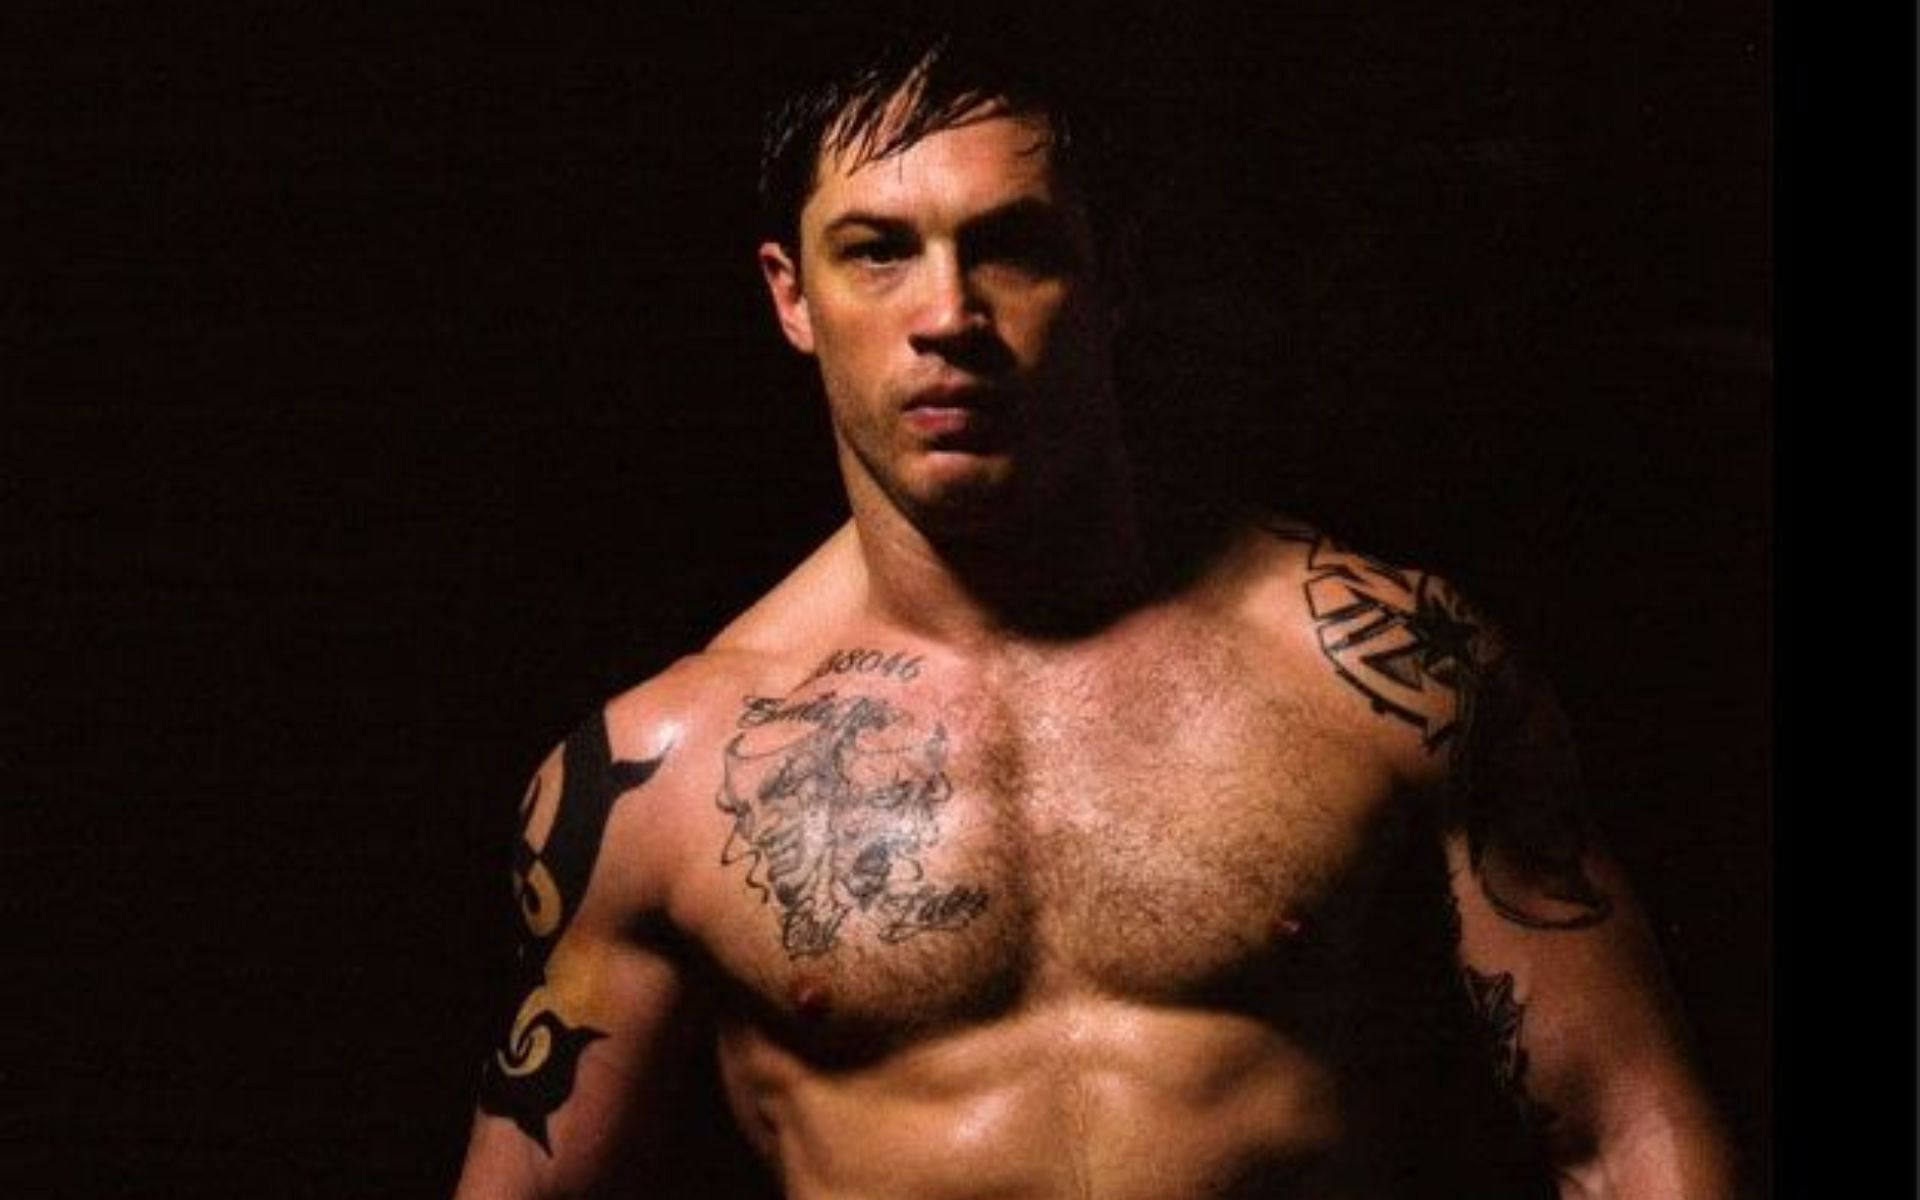 Actor Tom Hardy stunned viewers with his physique when he played an MMA fighter in Warrior [Image Credit: twitter.com/MensHealthUK]